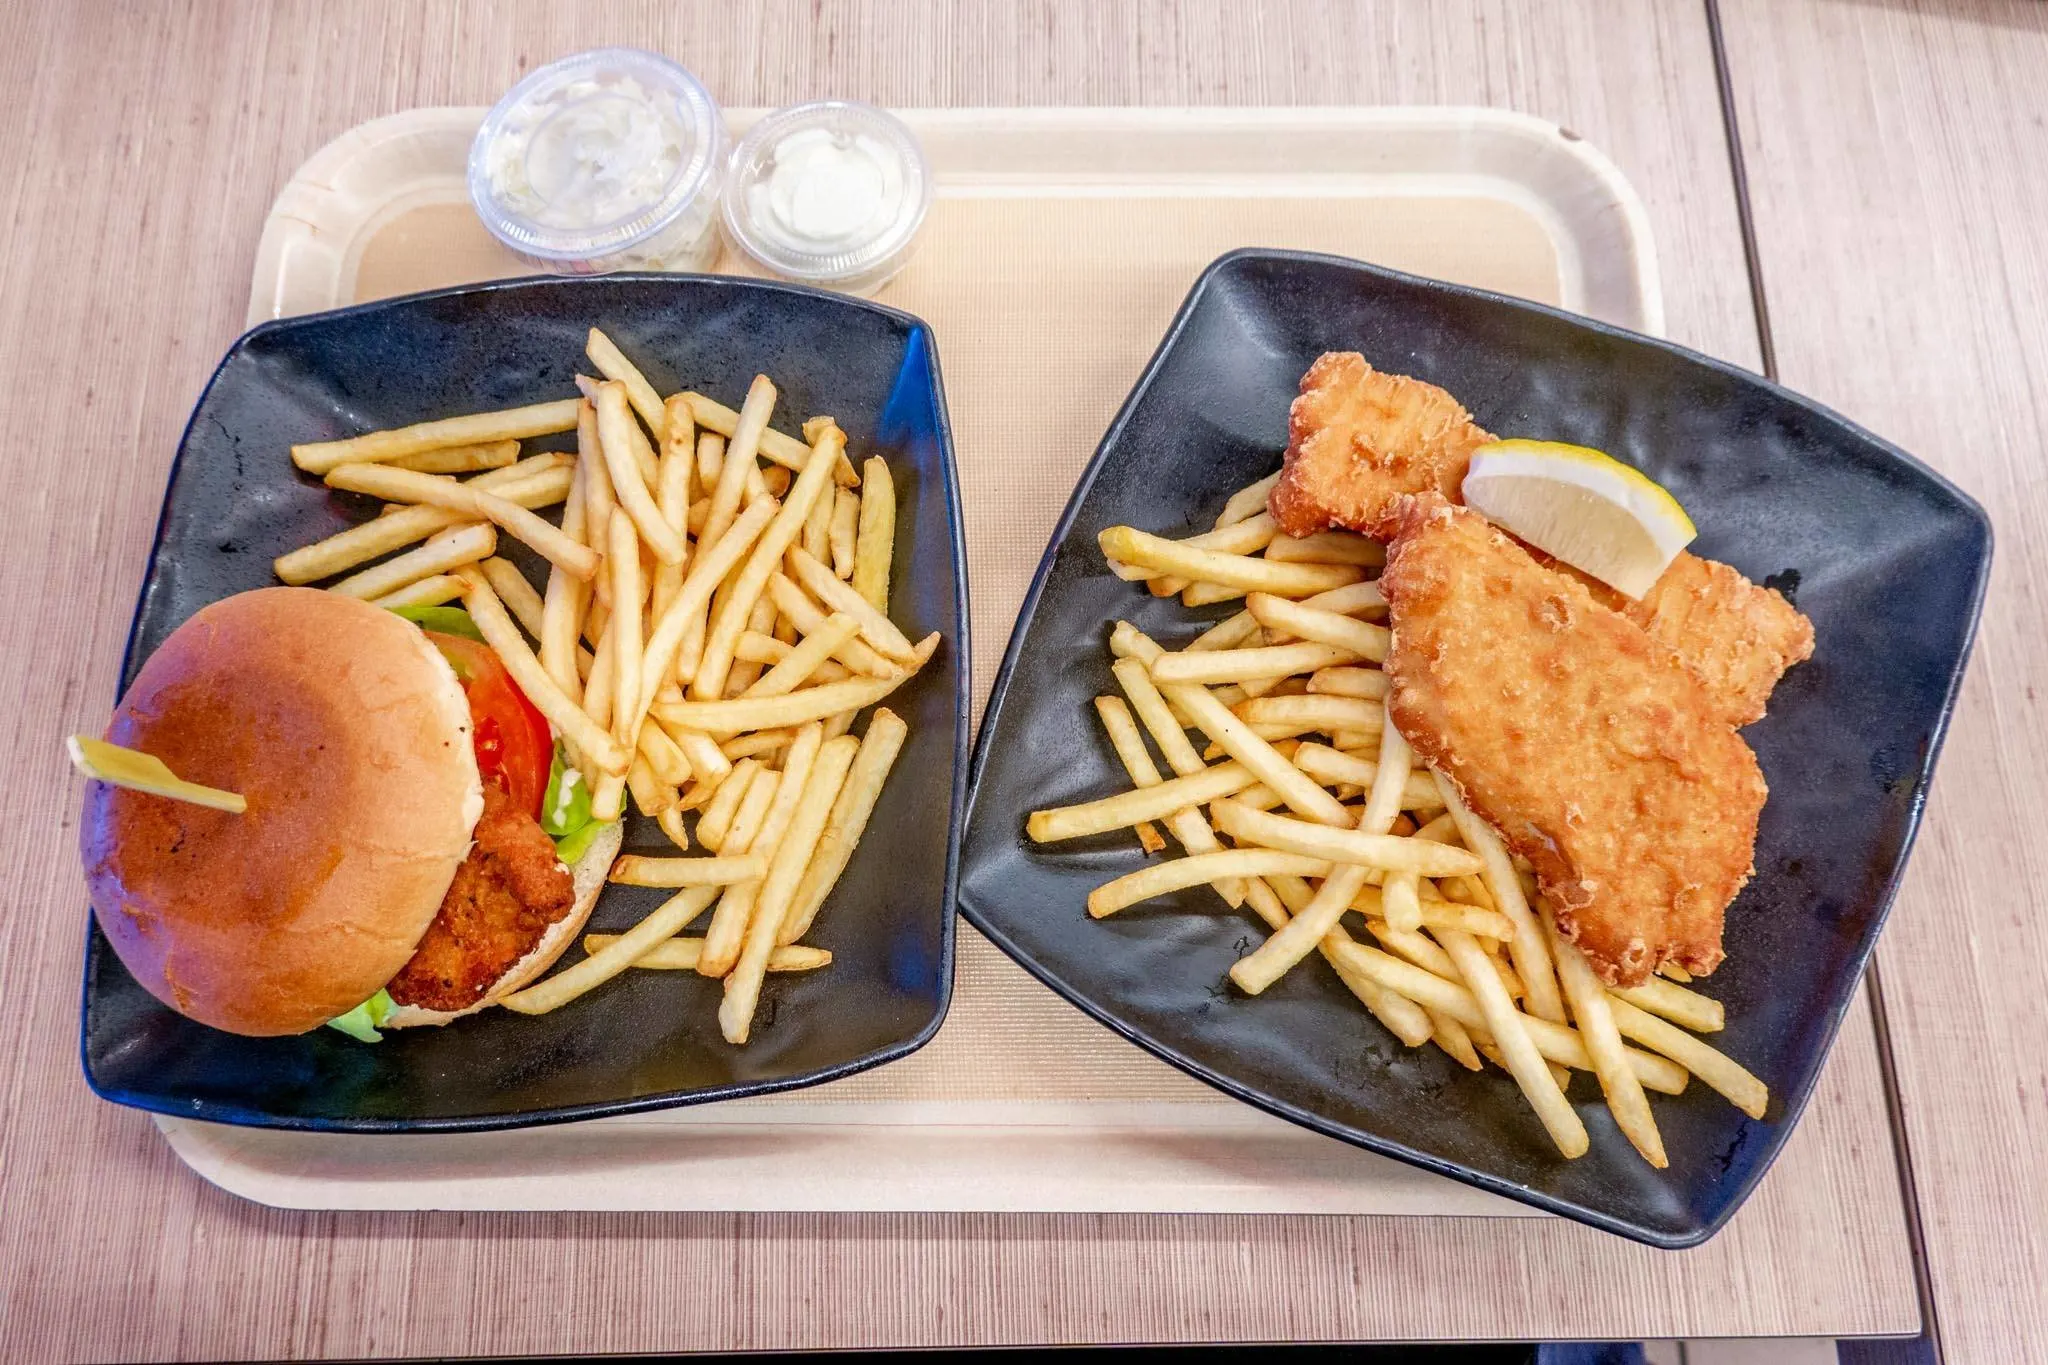 Plates of fish and chips and also a plate with a chicken sandwich